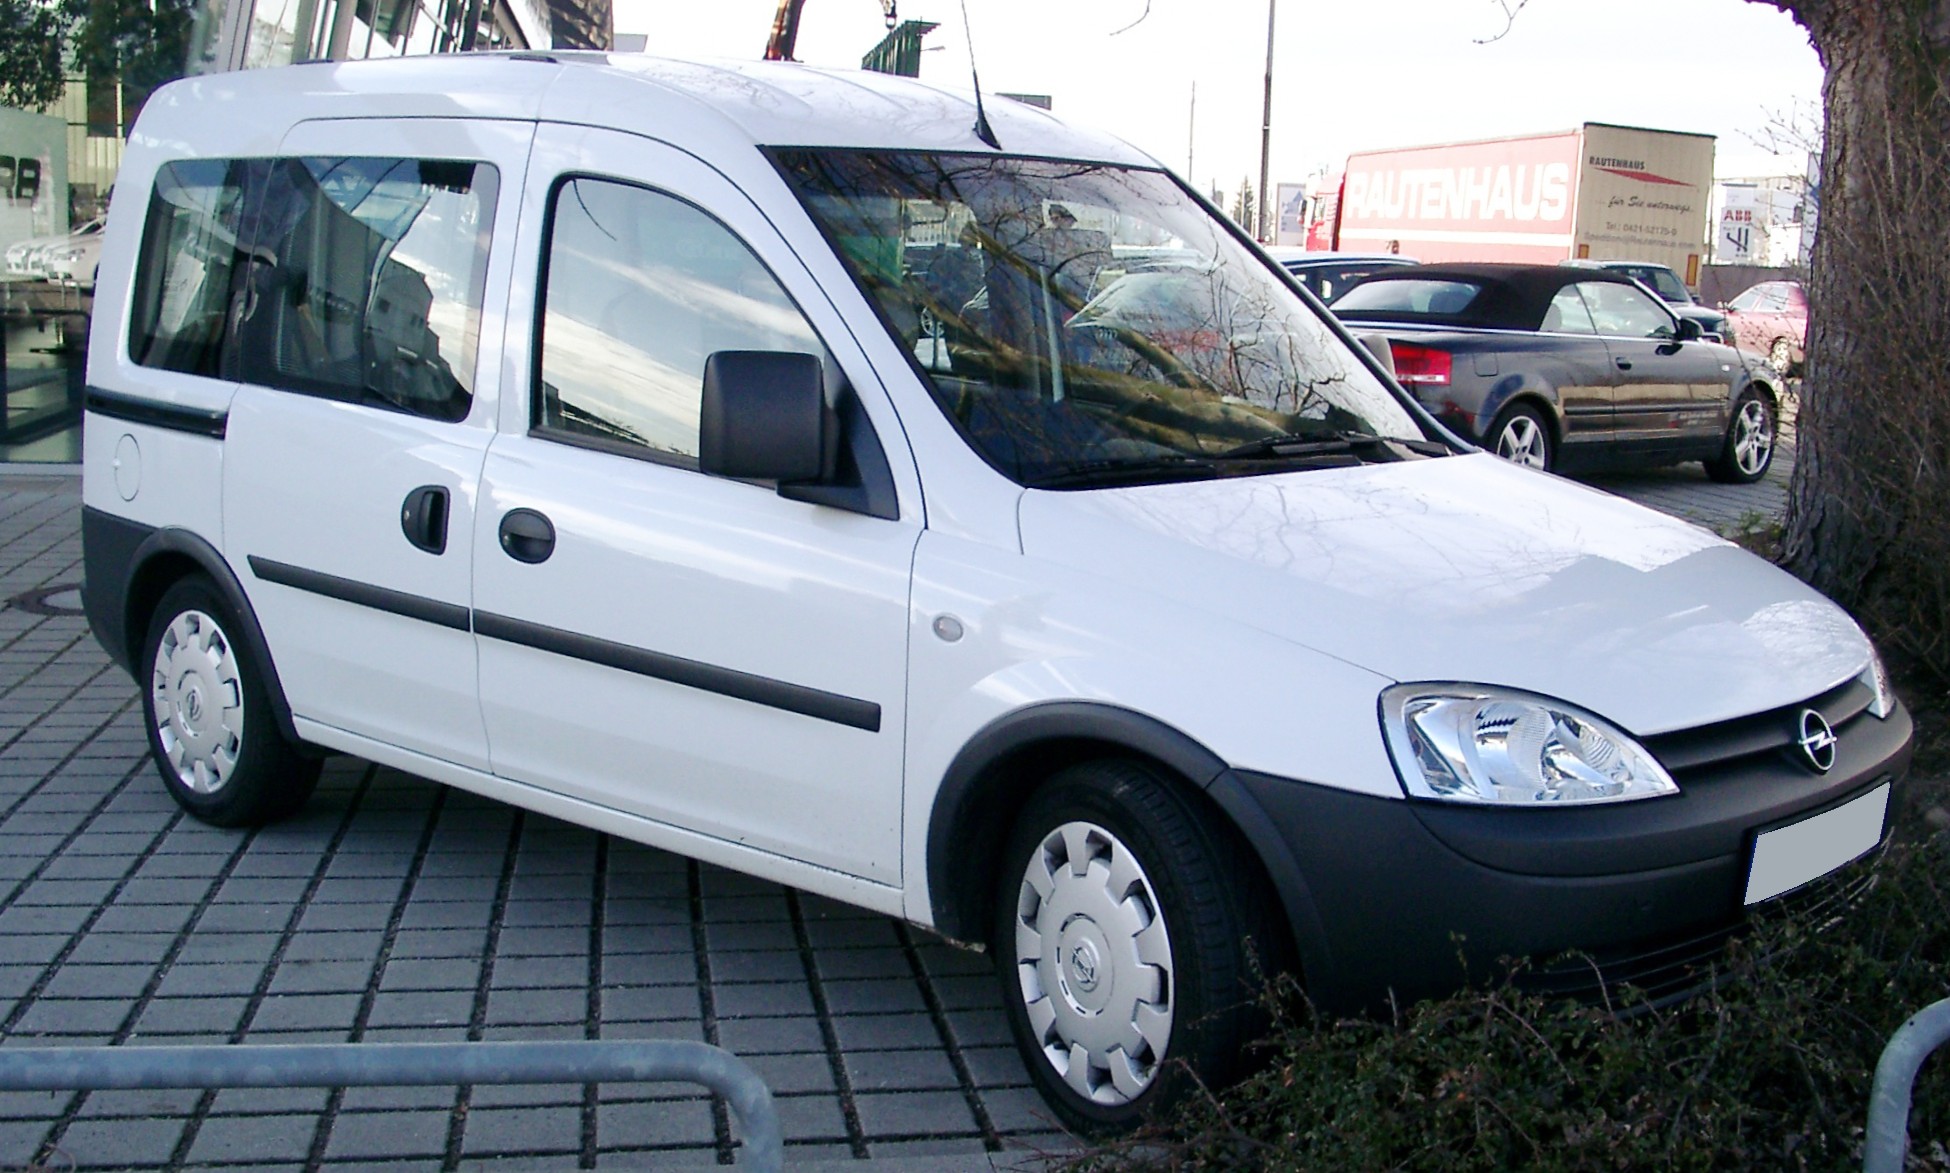 Opel Combo â€” a model manufactured by Opel. The model received many reviews